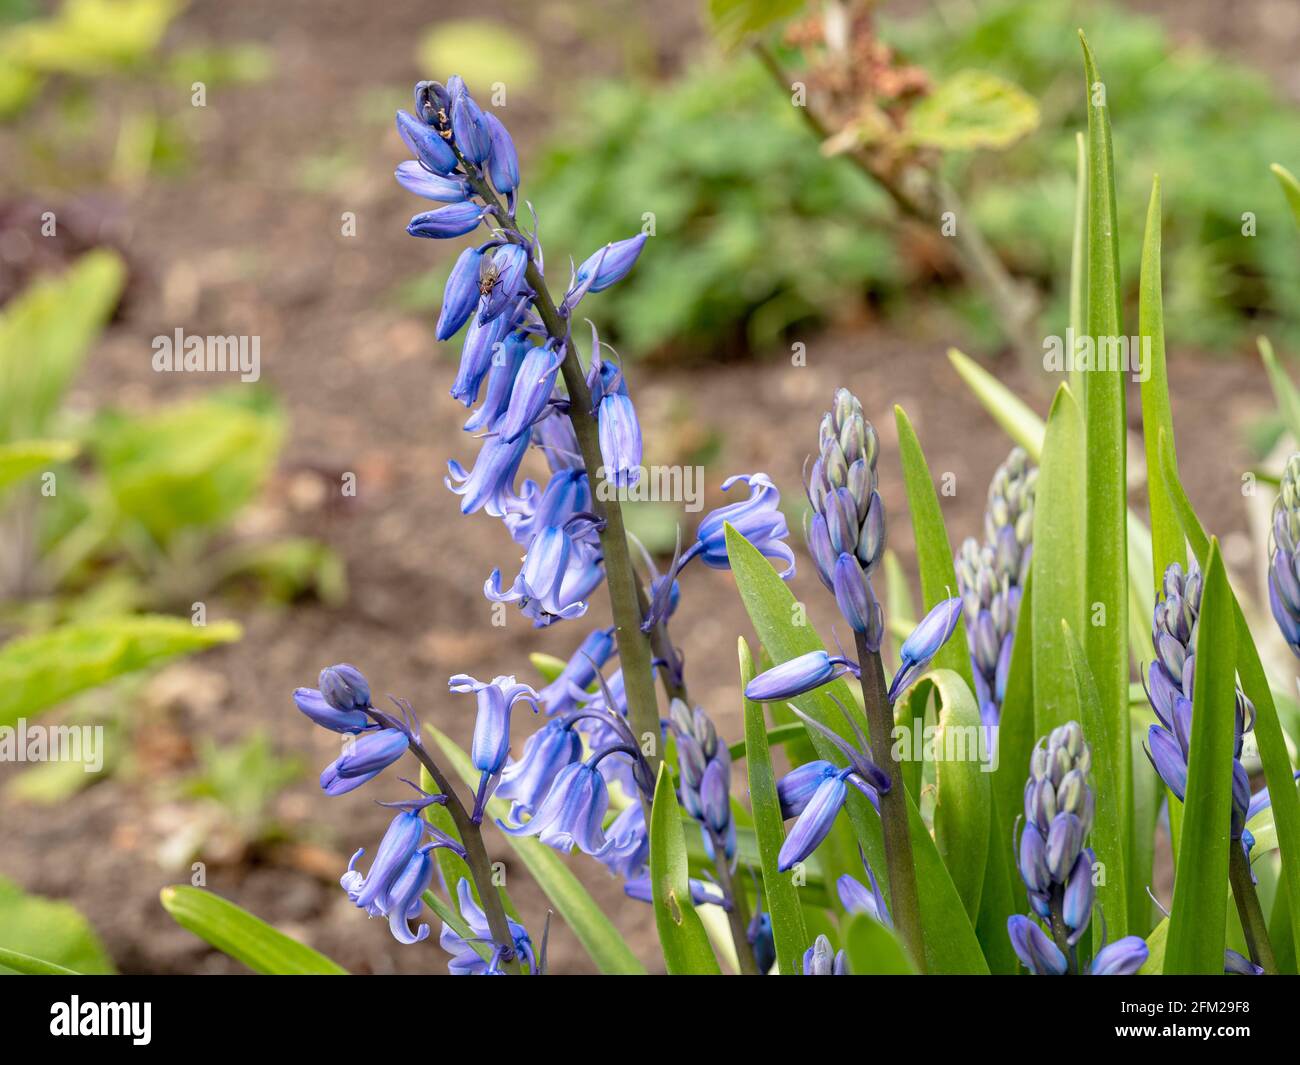 Bluebell buds just opening in a garden Stock Photo